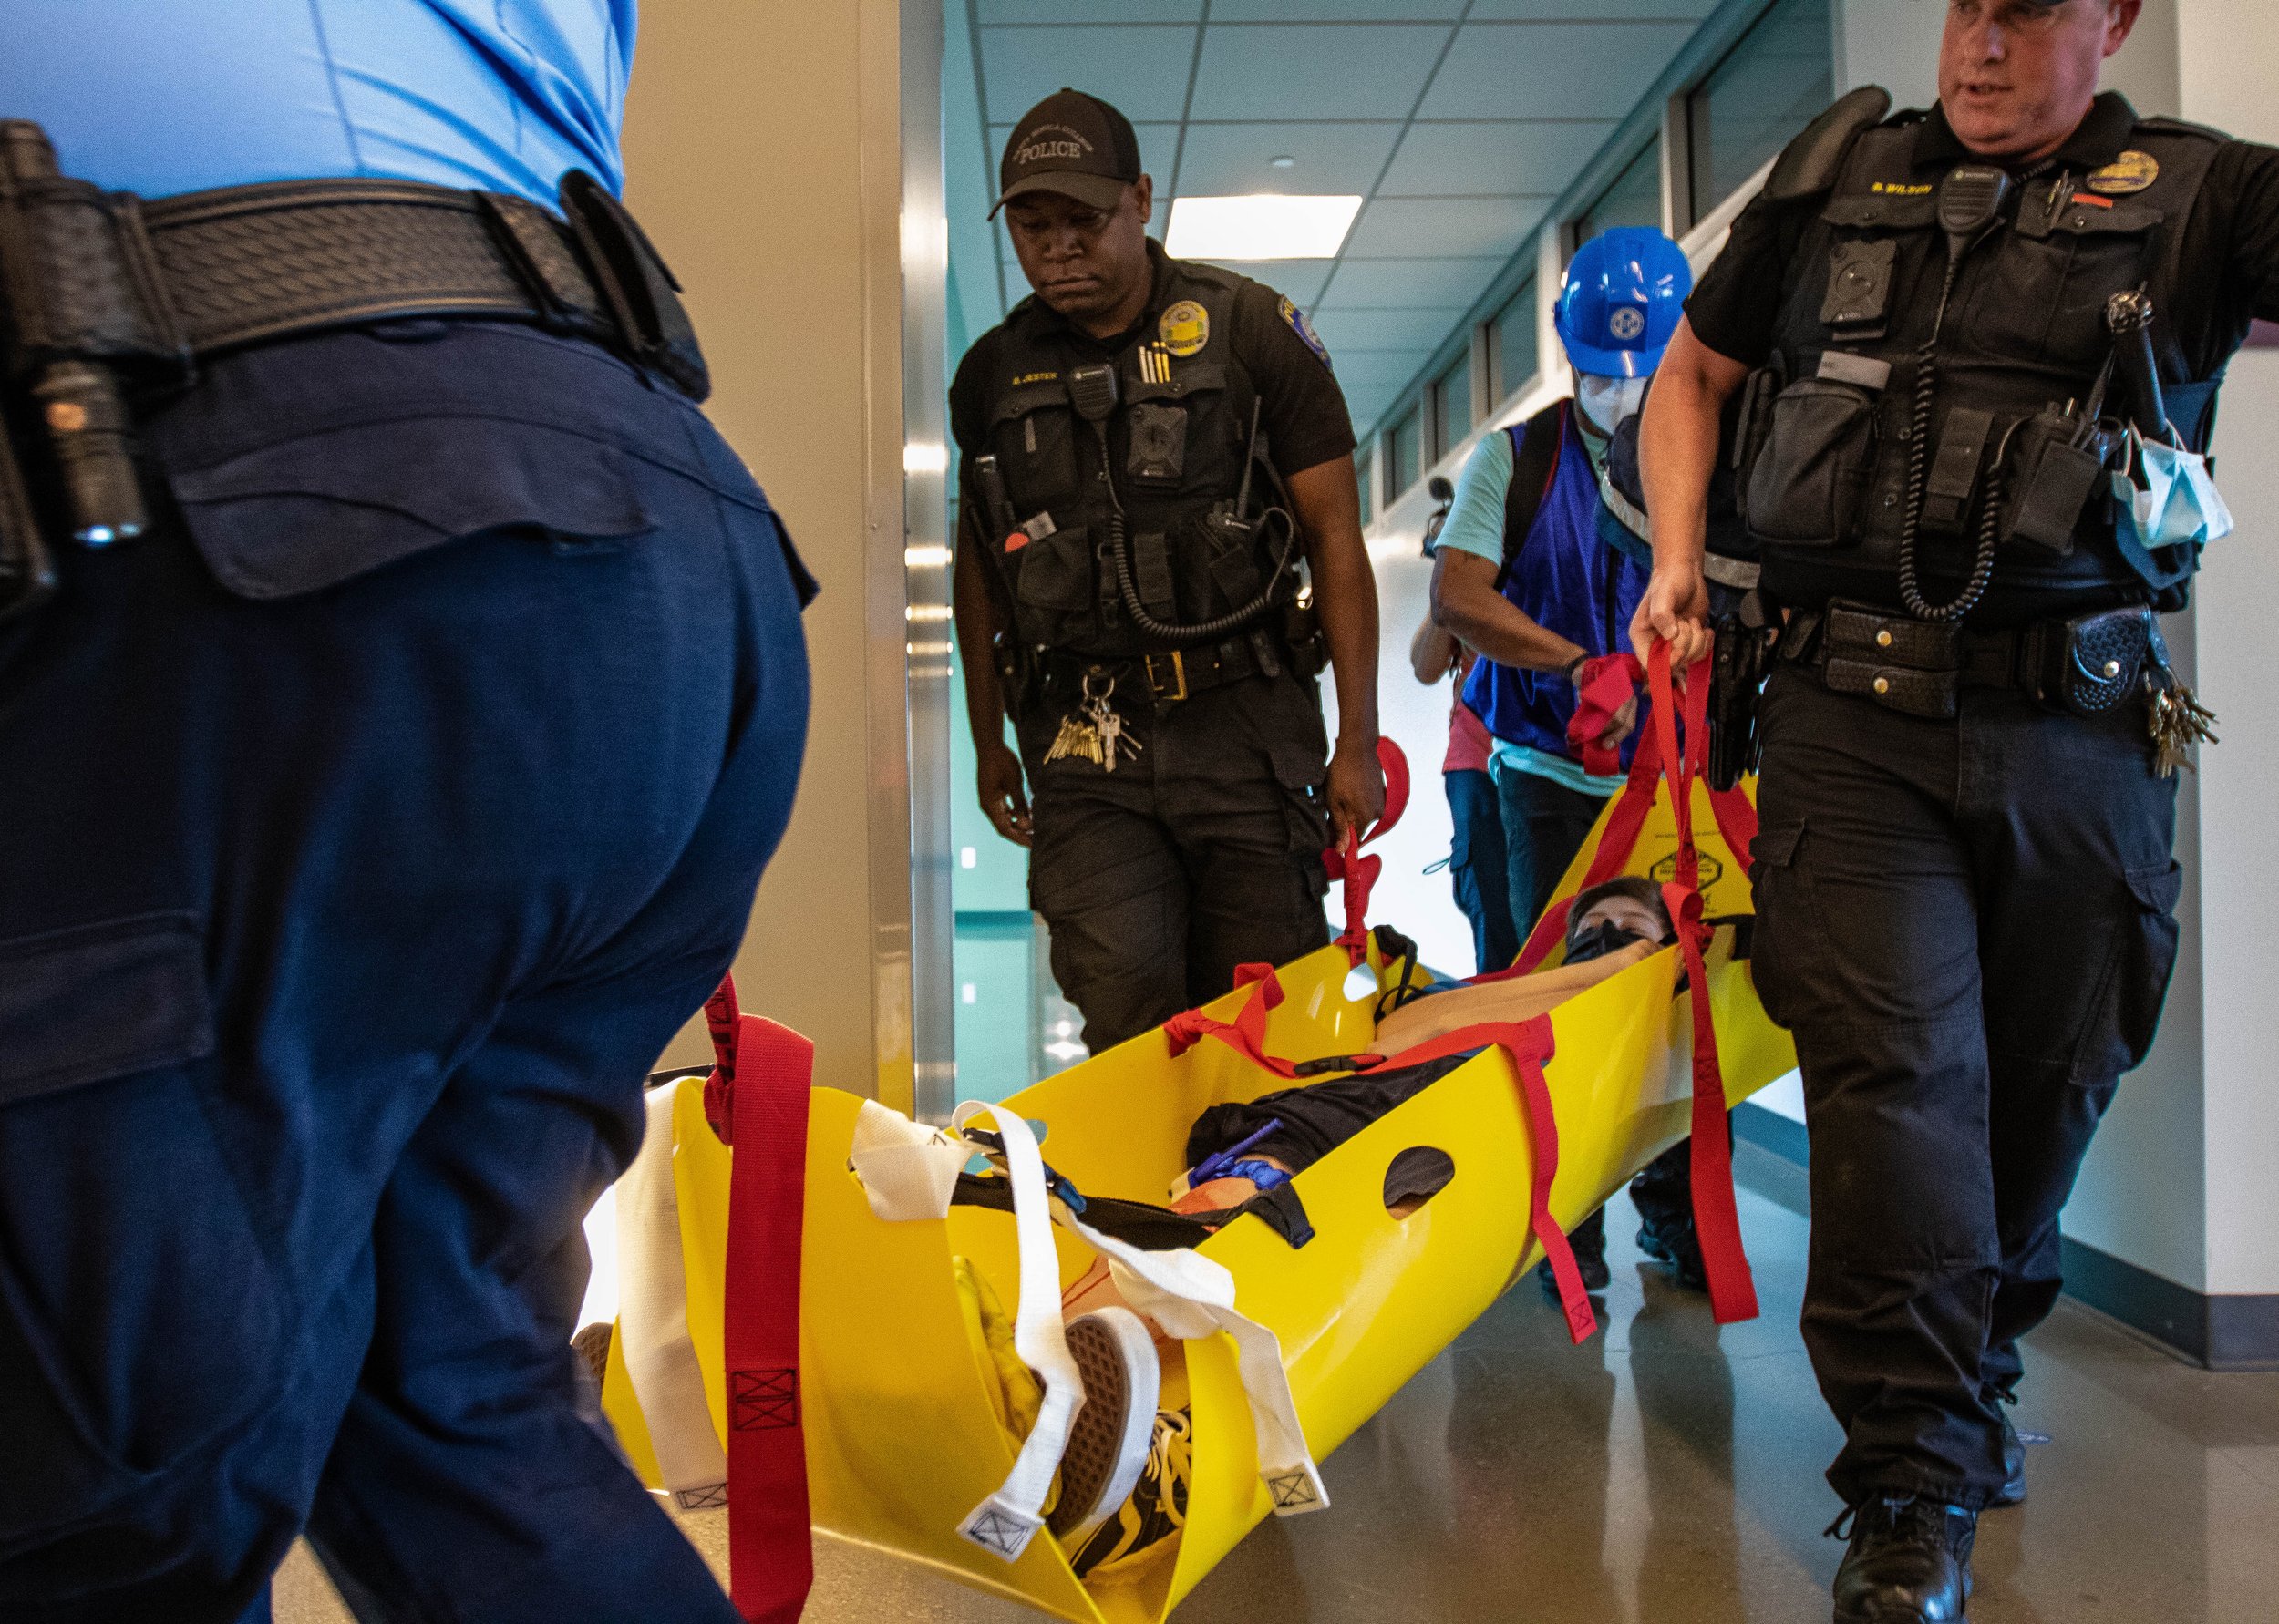  (L-R) Armando Barocio, Dominic Jester, Jorge Valadez, from the Campus Emergency Response Team and Sargent Bryan Wilson from the Santa Monica College (SMC) Police Department rescues Alex Bonin, one of the simulated injury drill participants of the 20